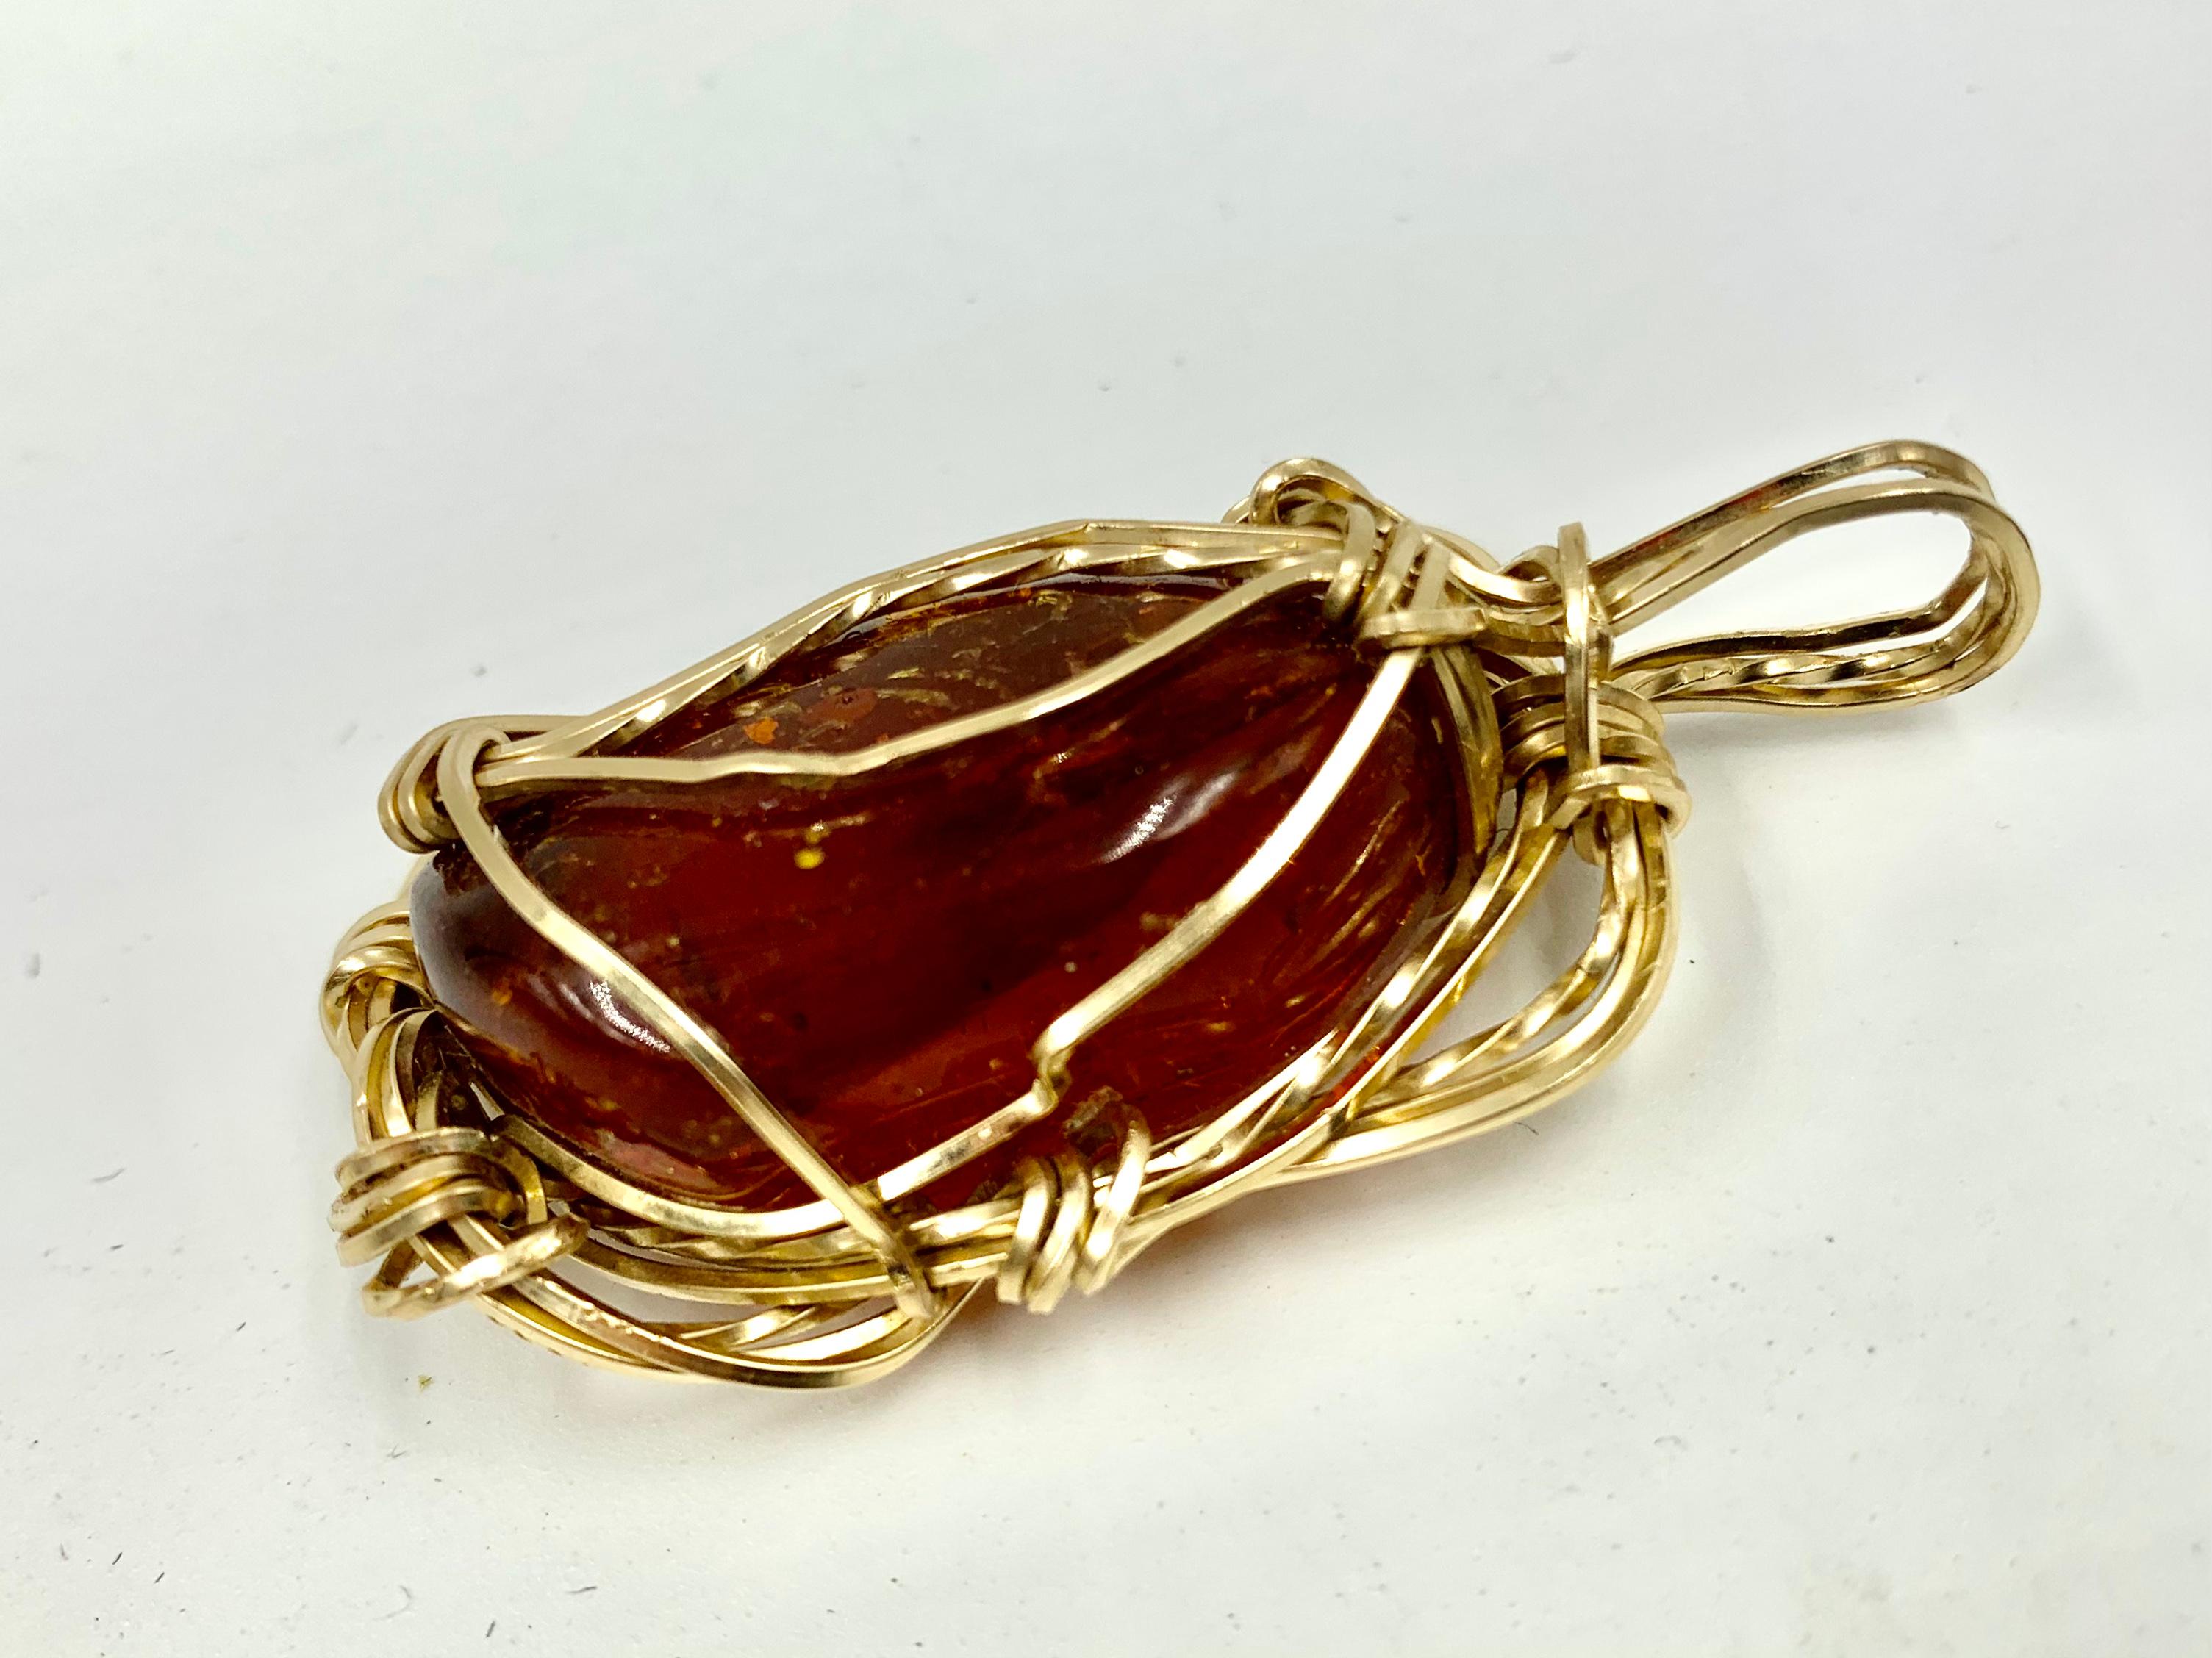 Tumbled Large Natural Amber Specimen 14K Yellow Gold Pendant For Sale